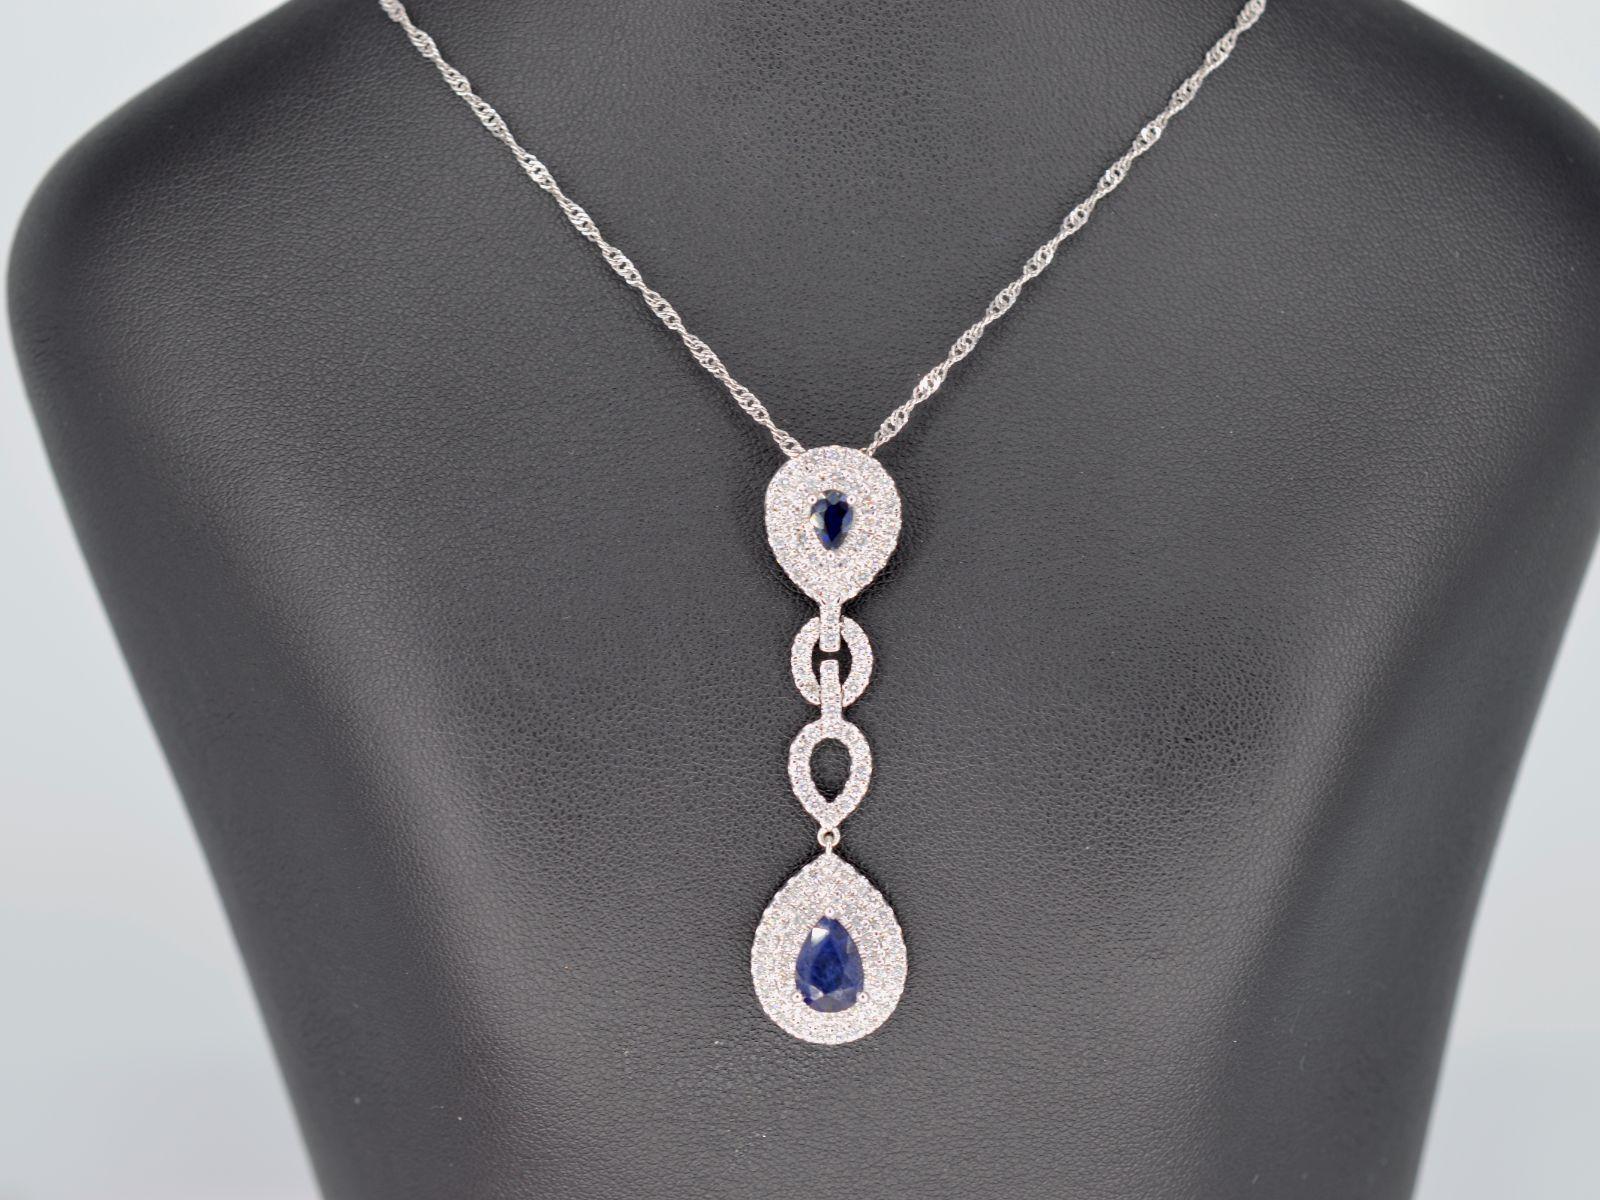 This white gold pendant is an elegant and luxurious piece of jewelry, featuring a long design and adorned with exquisite Swiss cut diamonds and pear-shaped sapphires. The white gold is a premium quality metal that is highly lustrous and durable. The